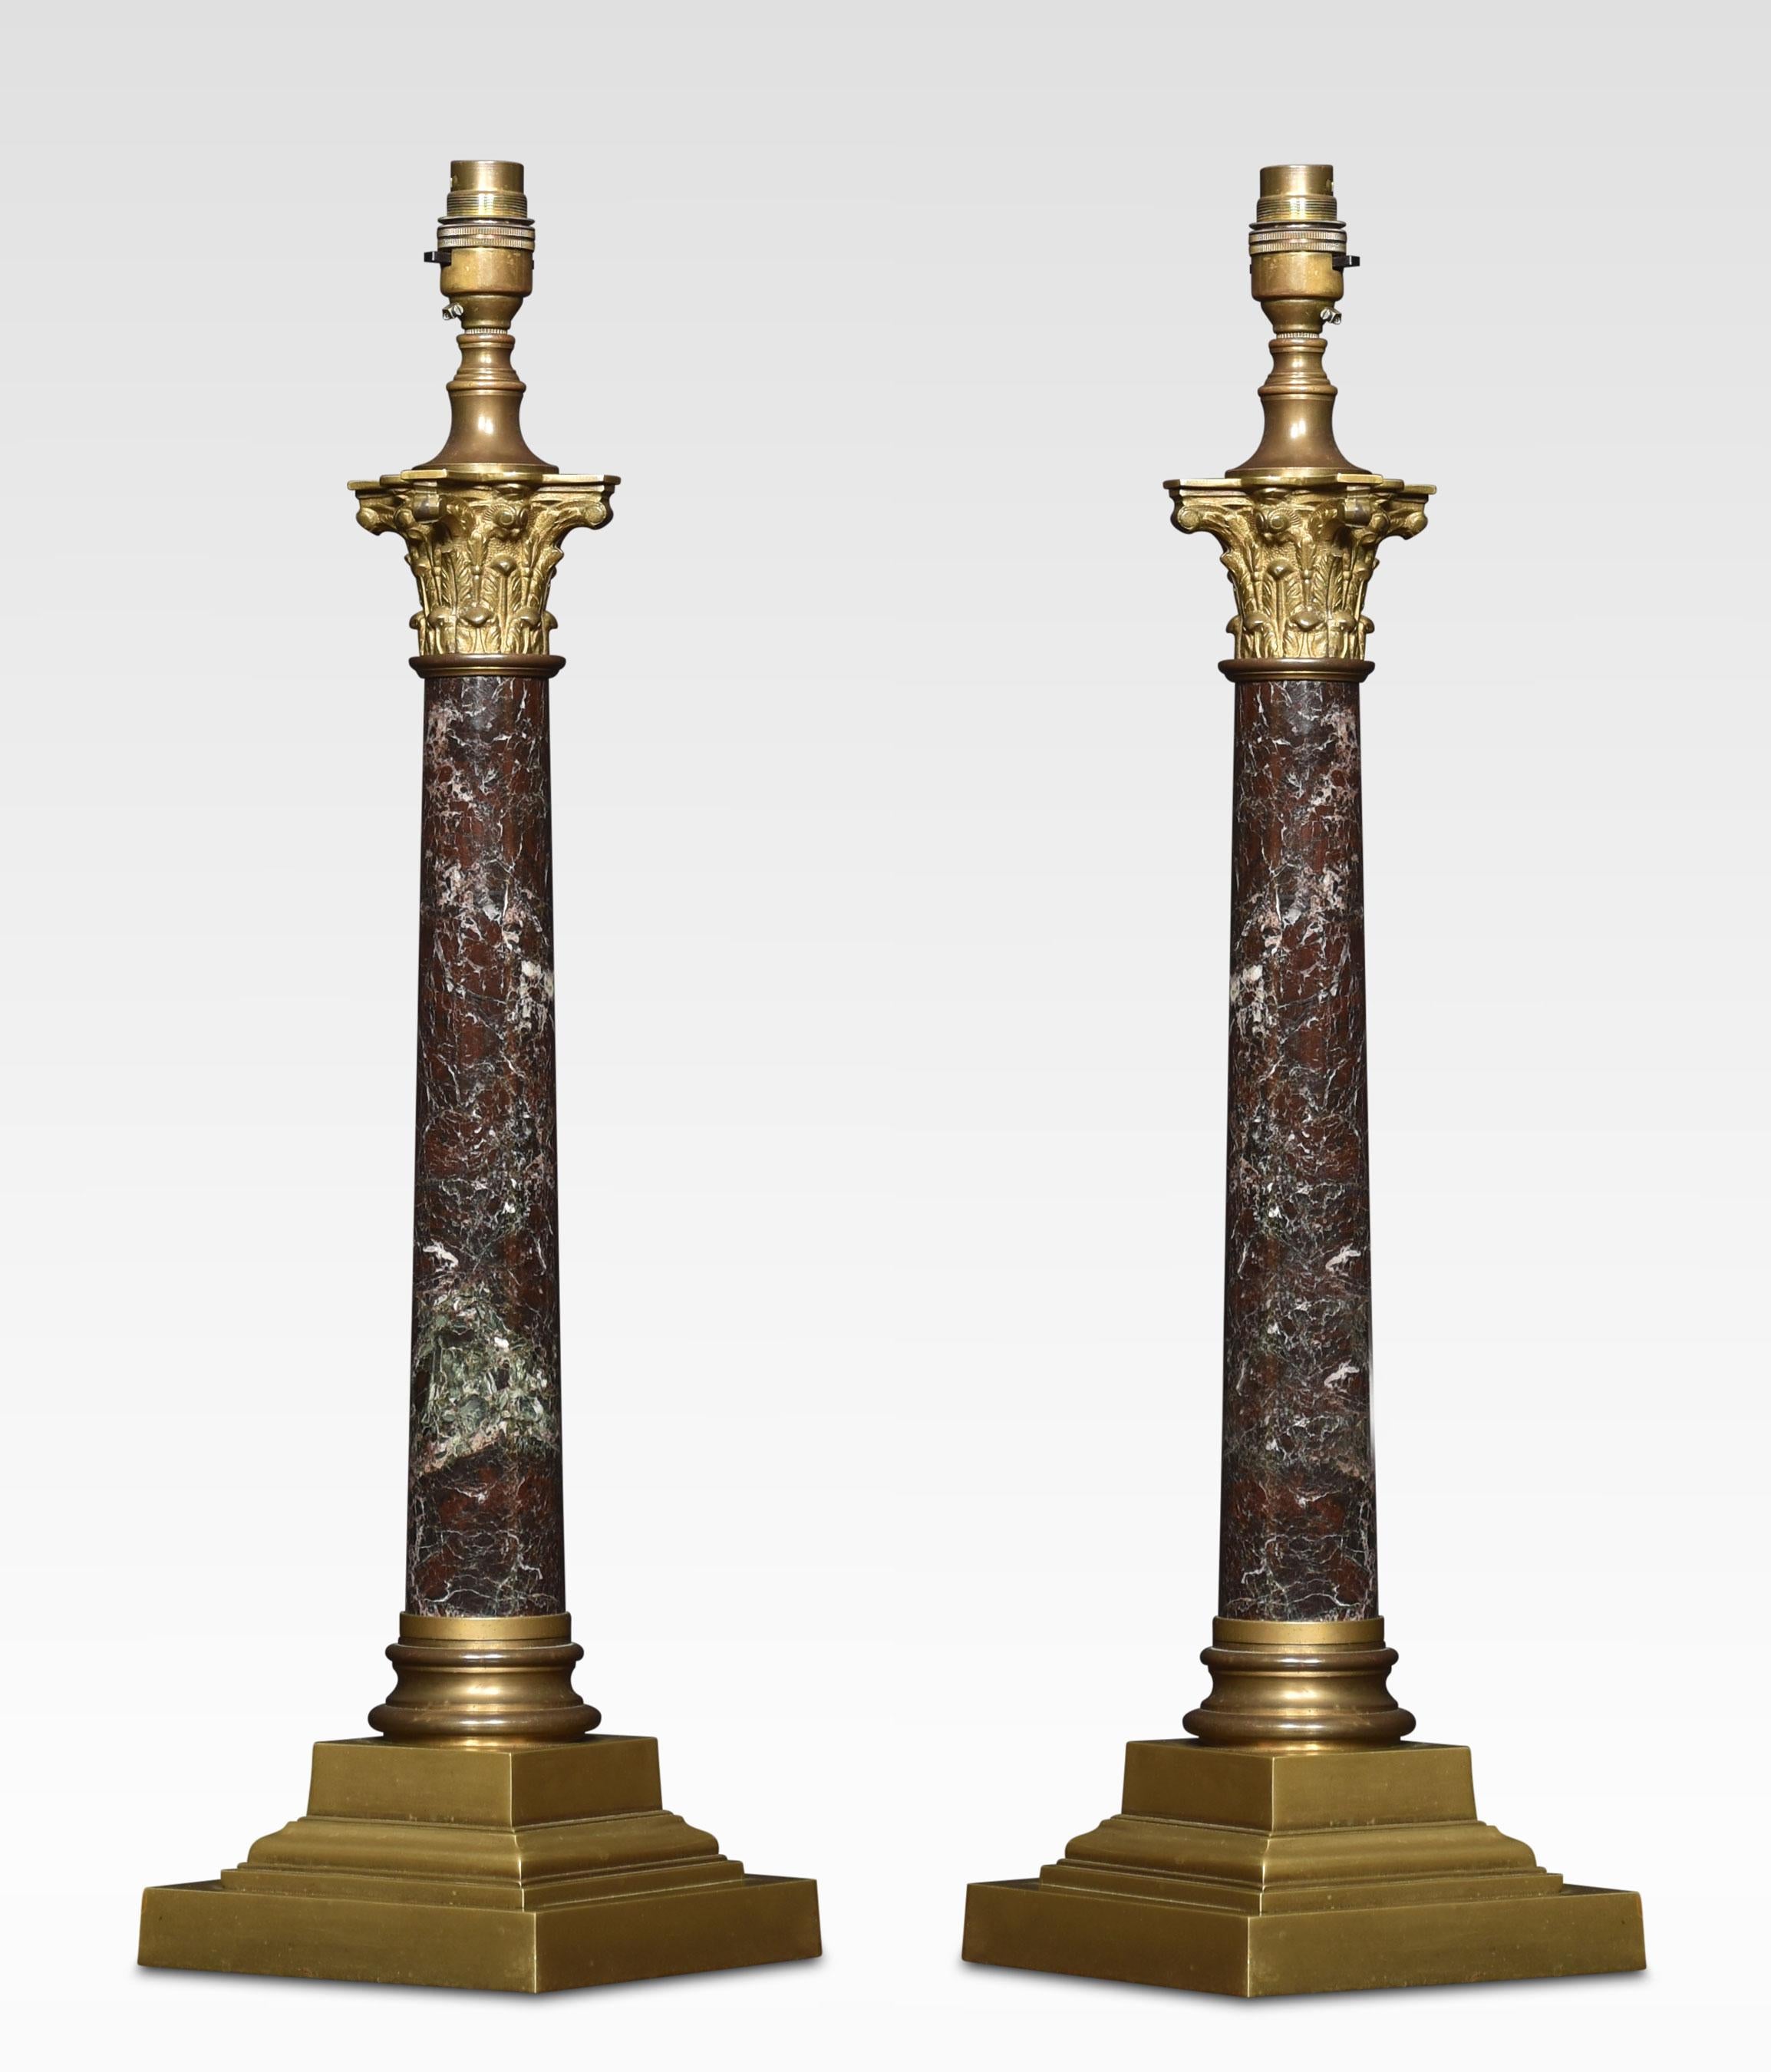 Pair of brass and marble table lamps the corinthian column tops above circular marble stems. All raised up on stepped base. The lamps have been rewired. Lampshades are not included.
Dimensions
Height 23 Inches
Width 6 Inches
Depth 6 Inches.